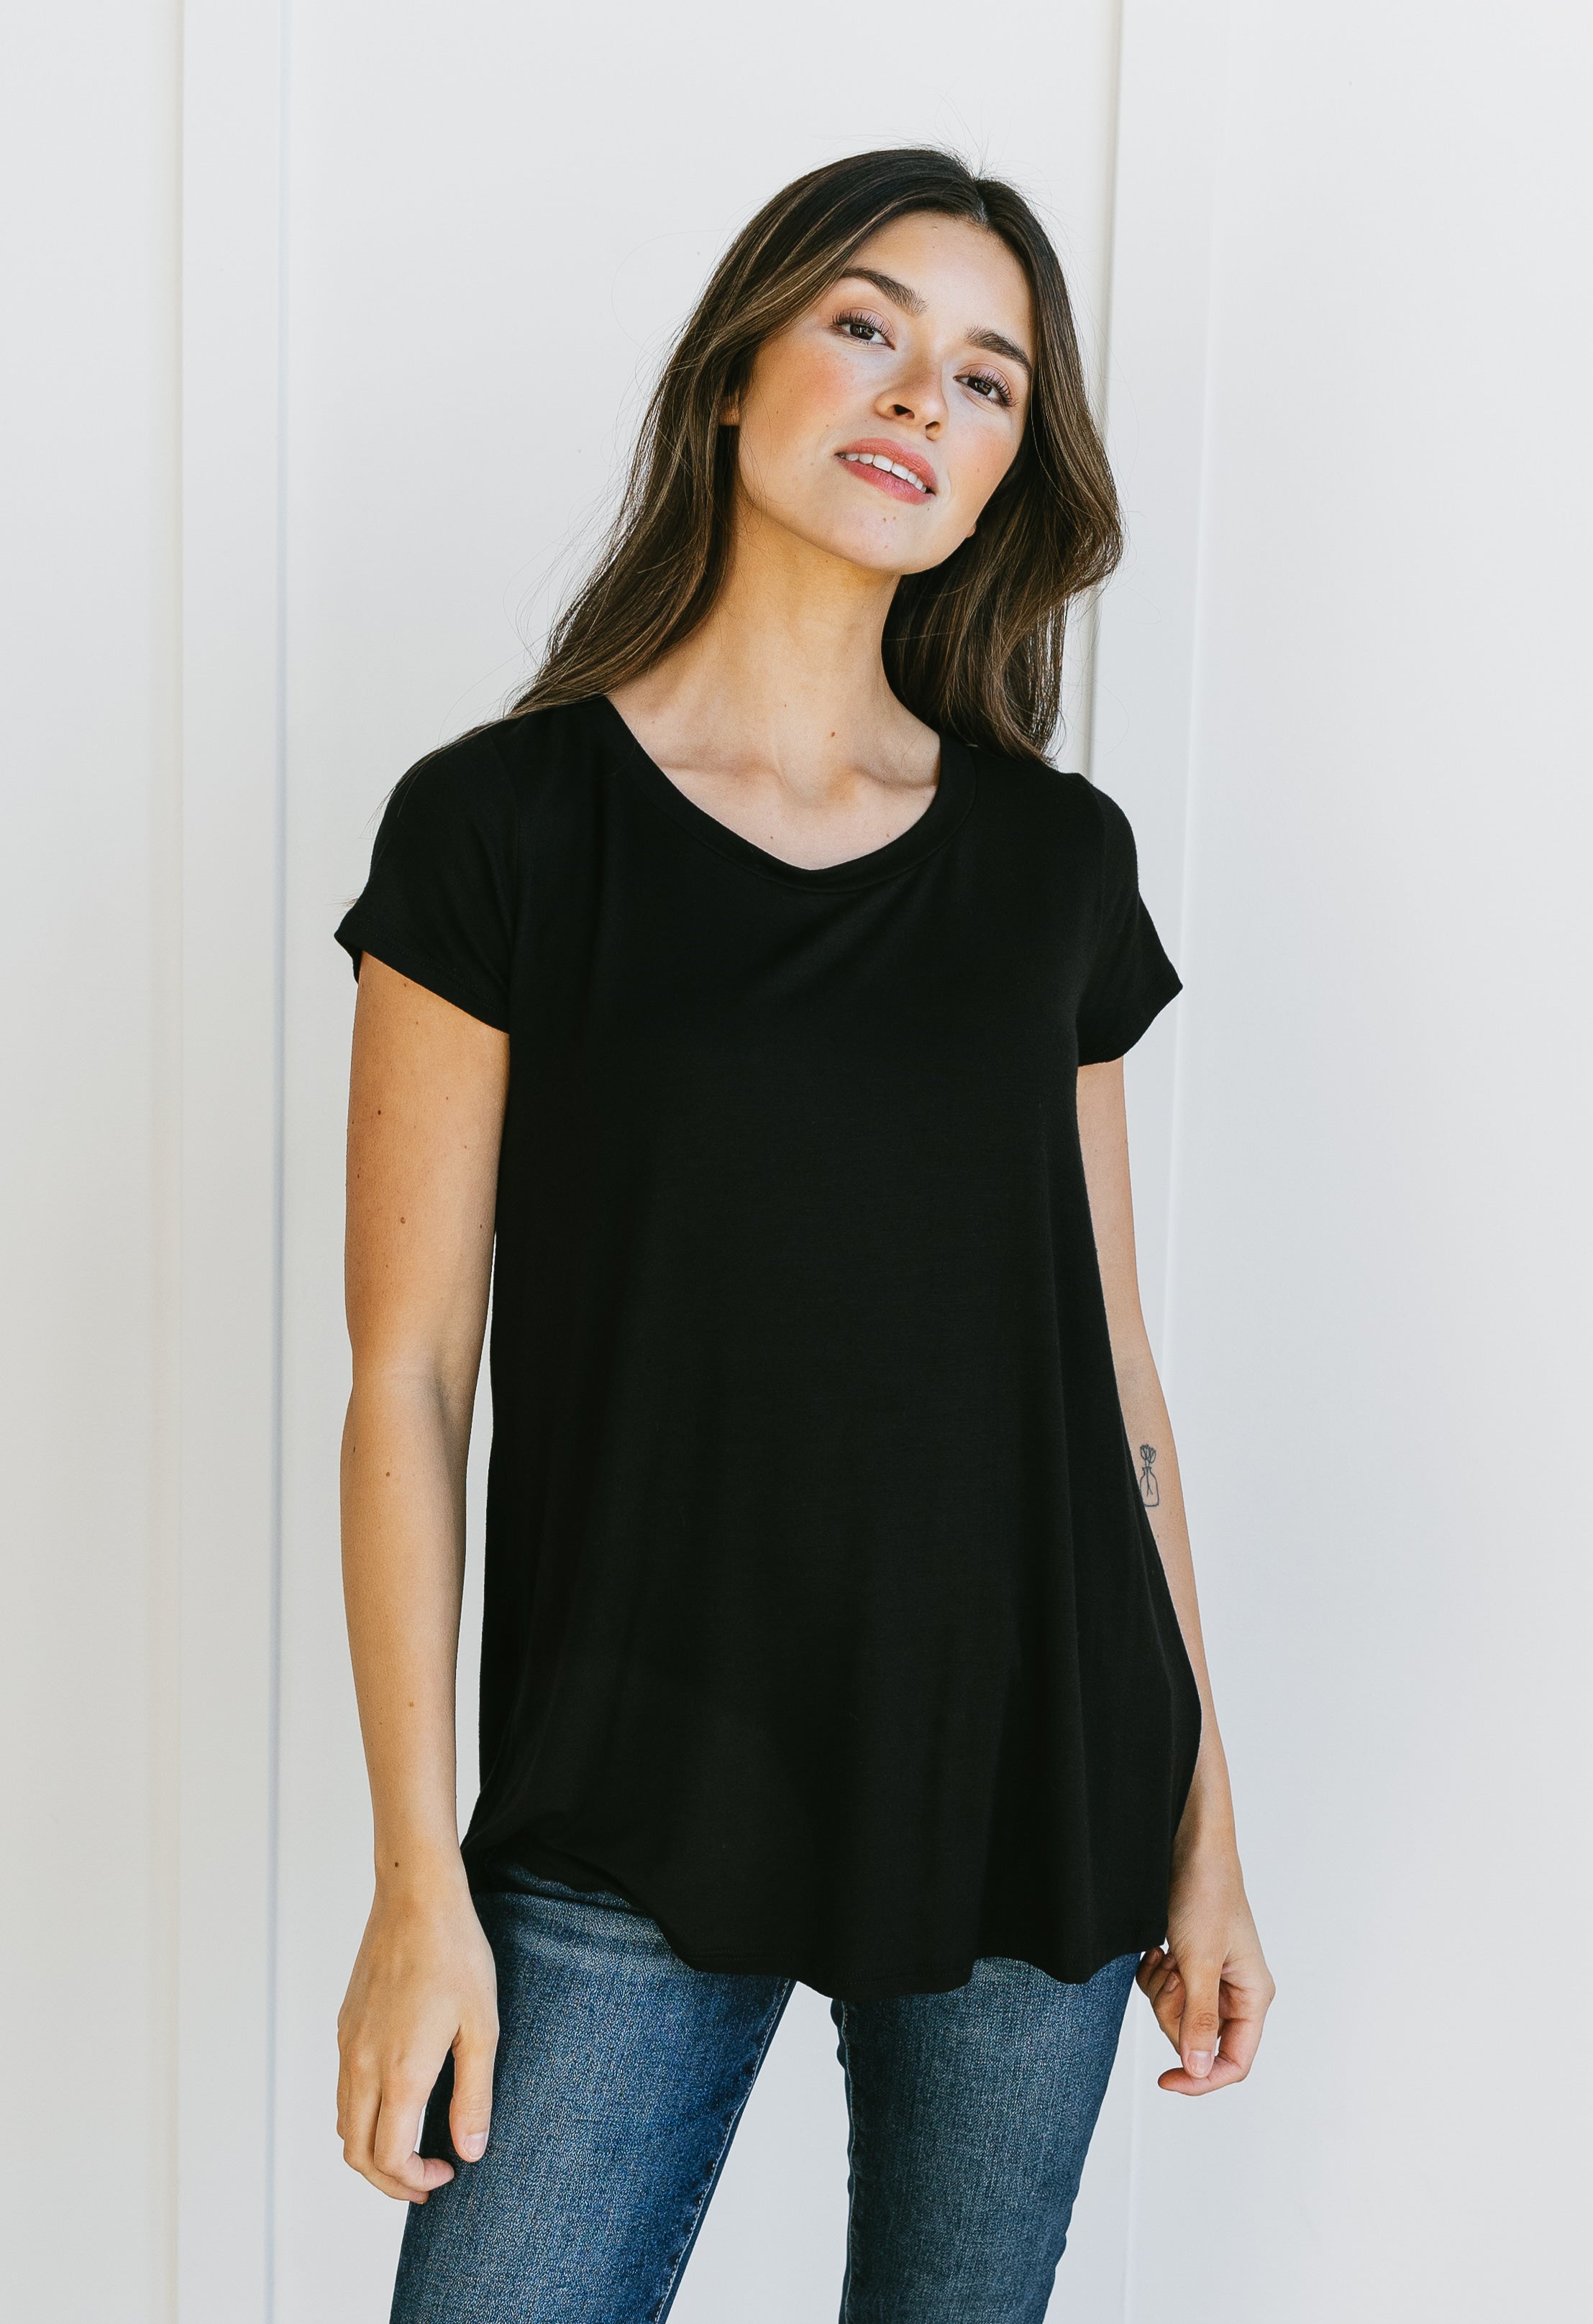 Cap Sleeve Top - BLACK - willows clothing S/S Shirt